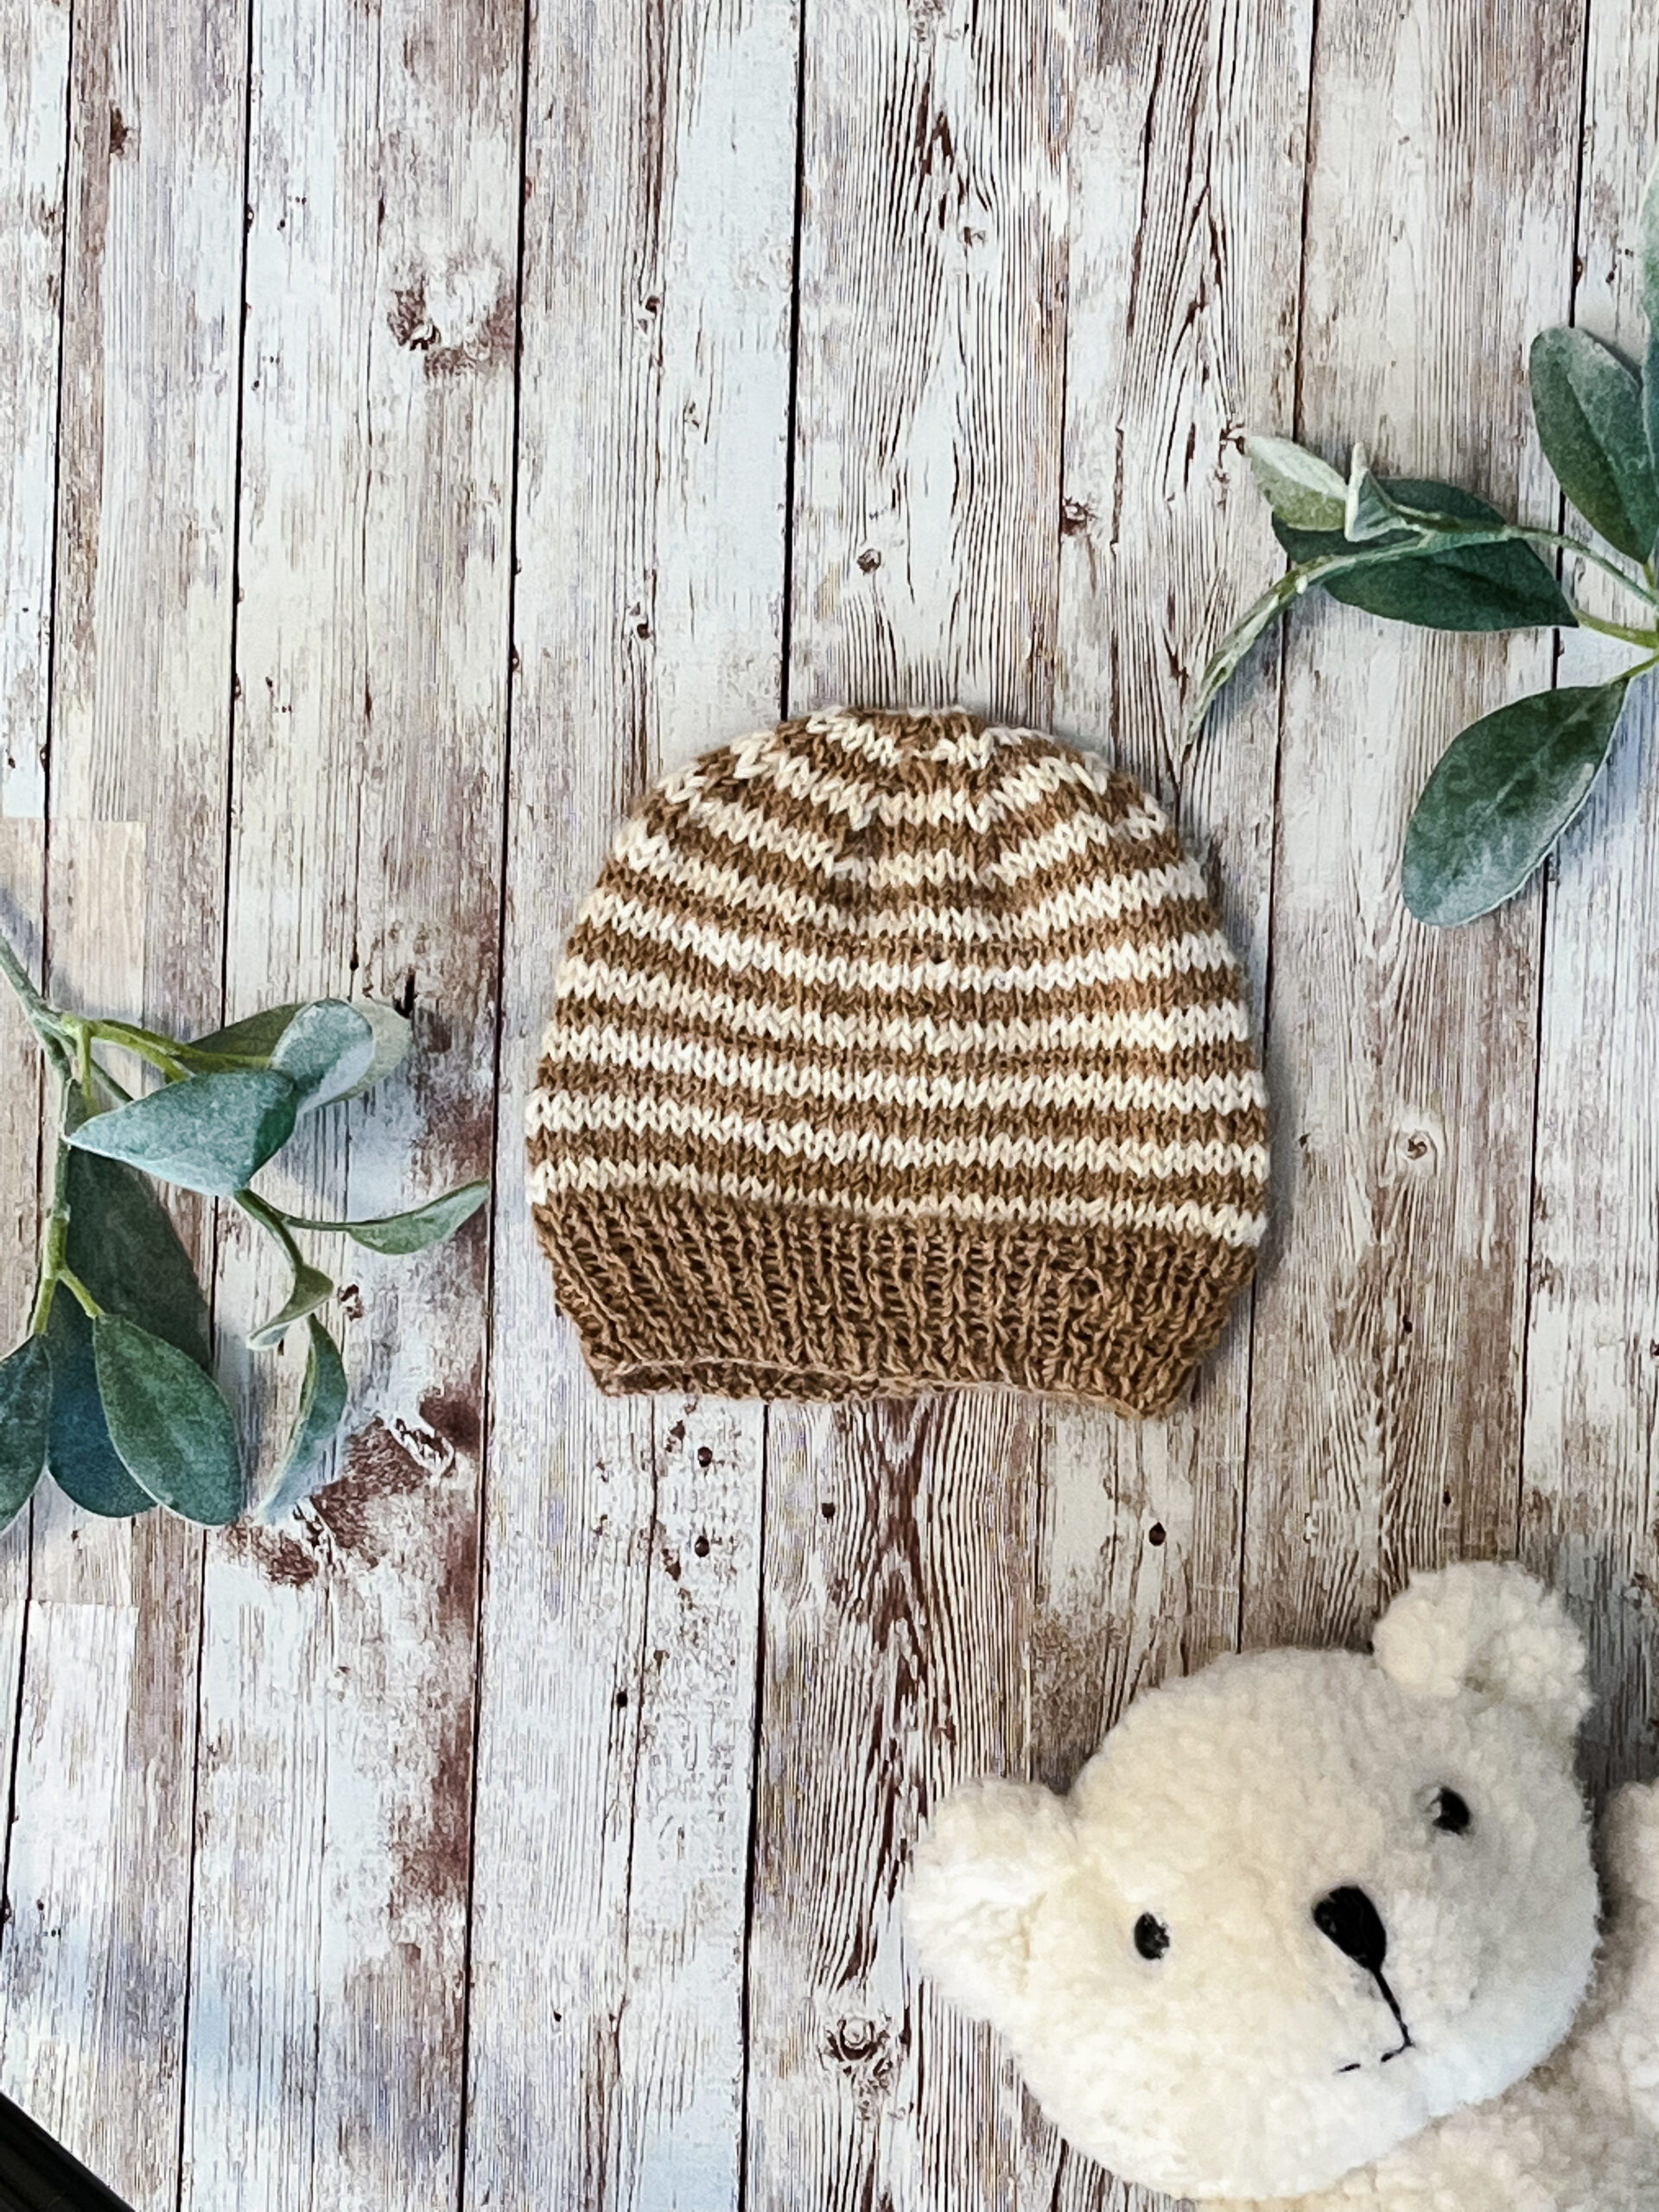 An alpaca hat with undyed tan and off-white strips is on a wood background with sage leaves and a white teddy bear